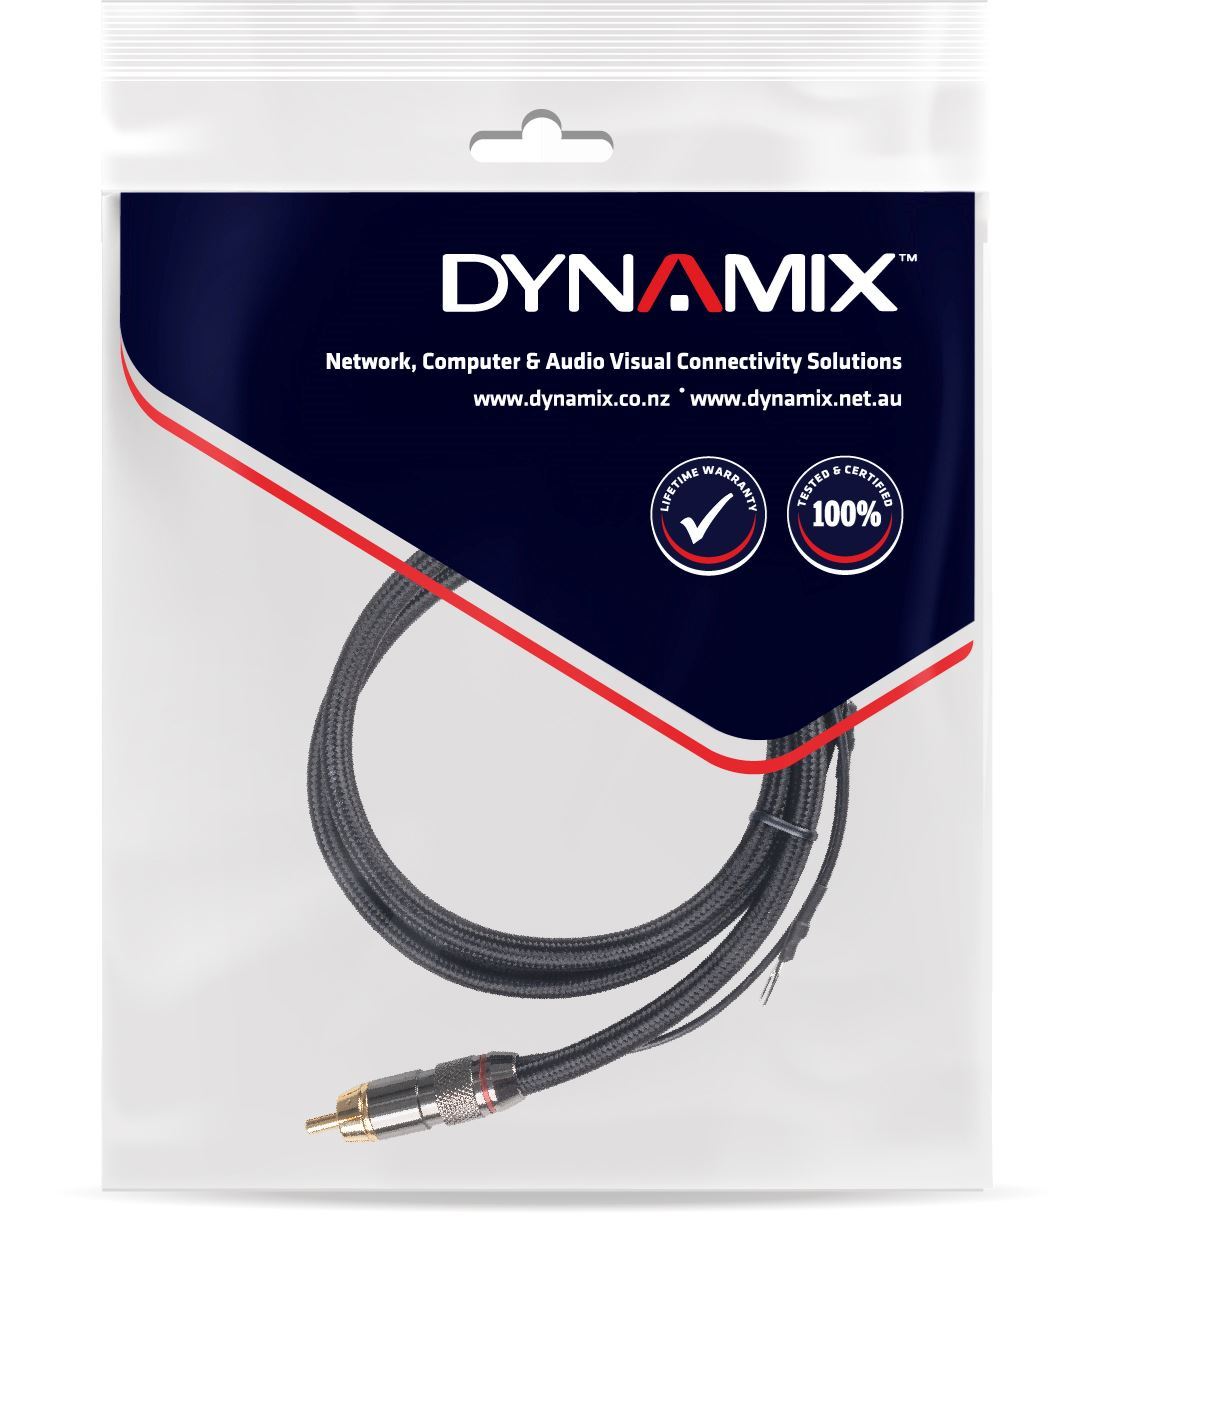 DYNAMIX_0.75m_Coaxial_Subwoofer_Cable_RCA_Male_to_Male_with_Grounding_Spade_Connectors 518